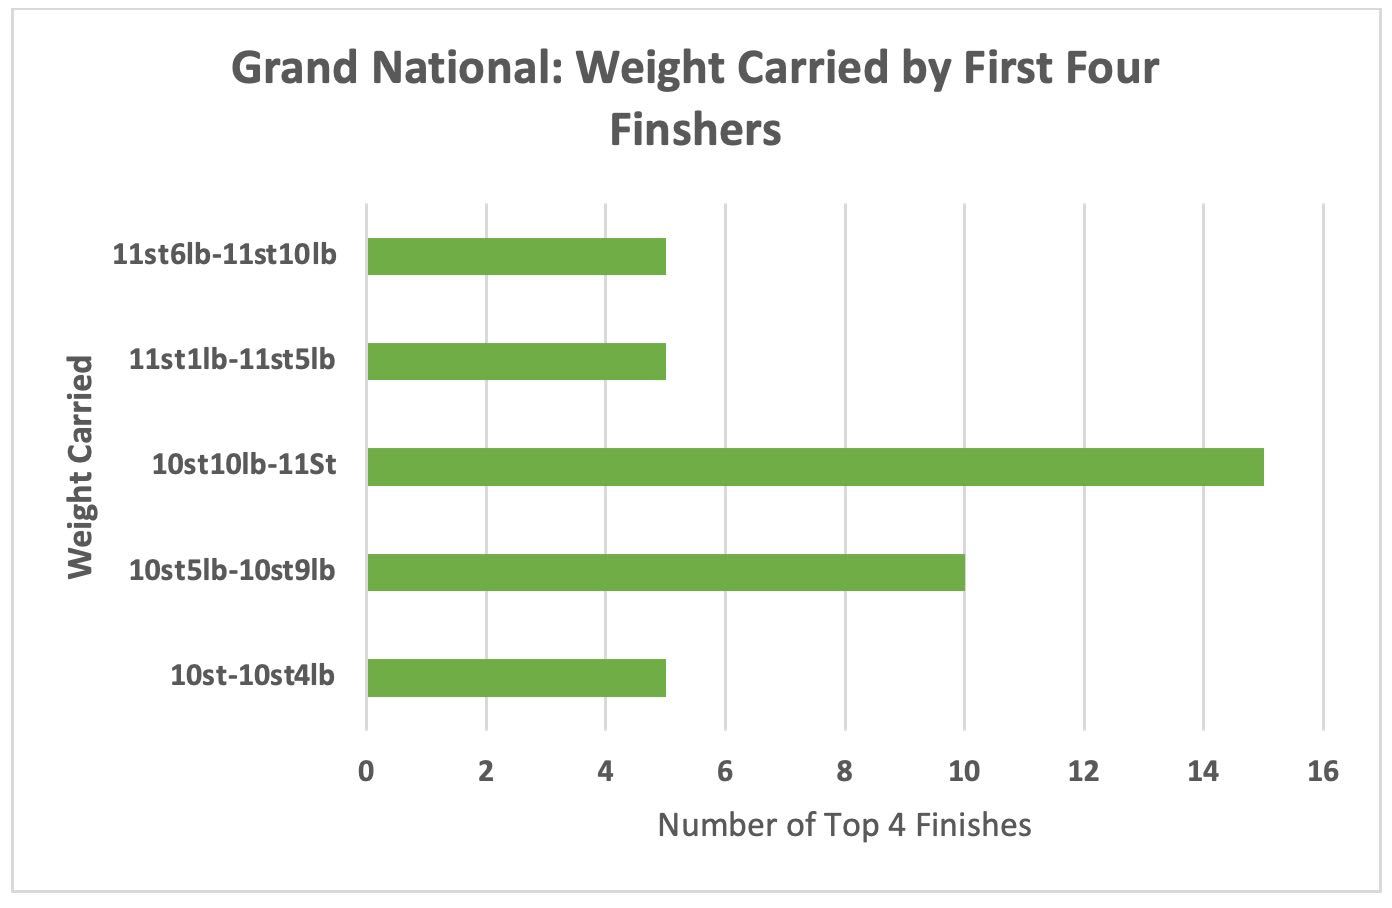 Grand national 10 Year Weight Trends